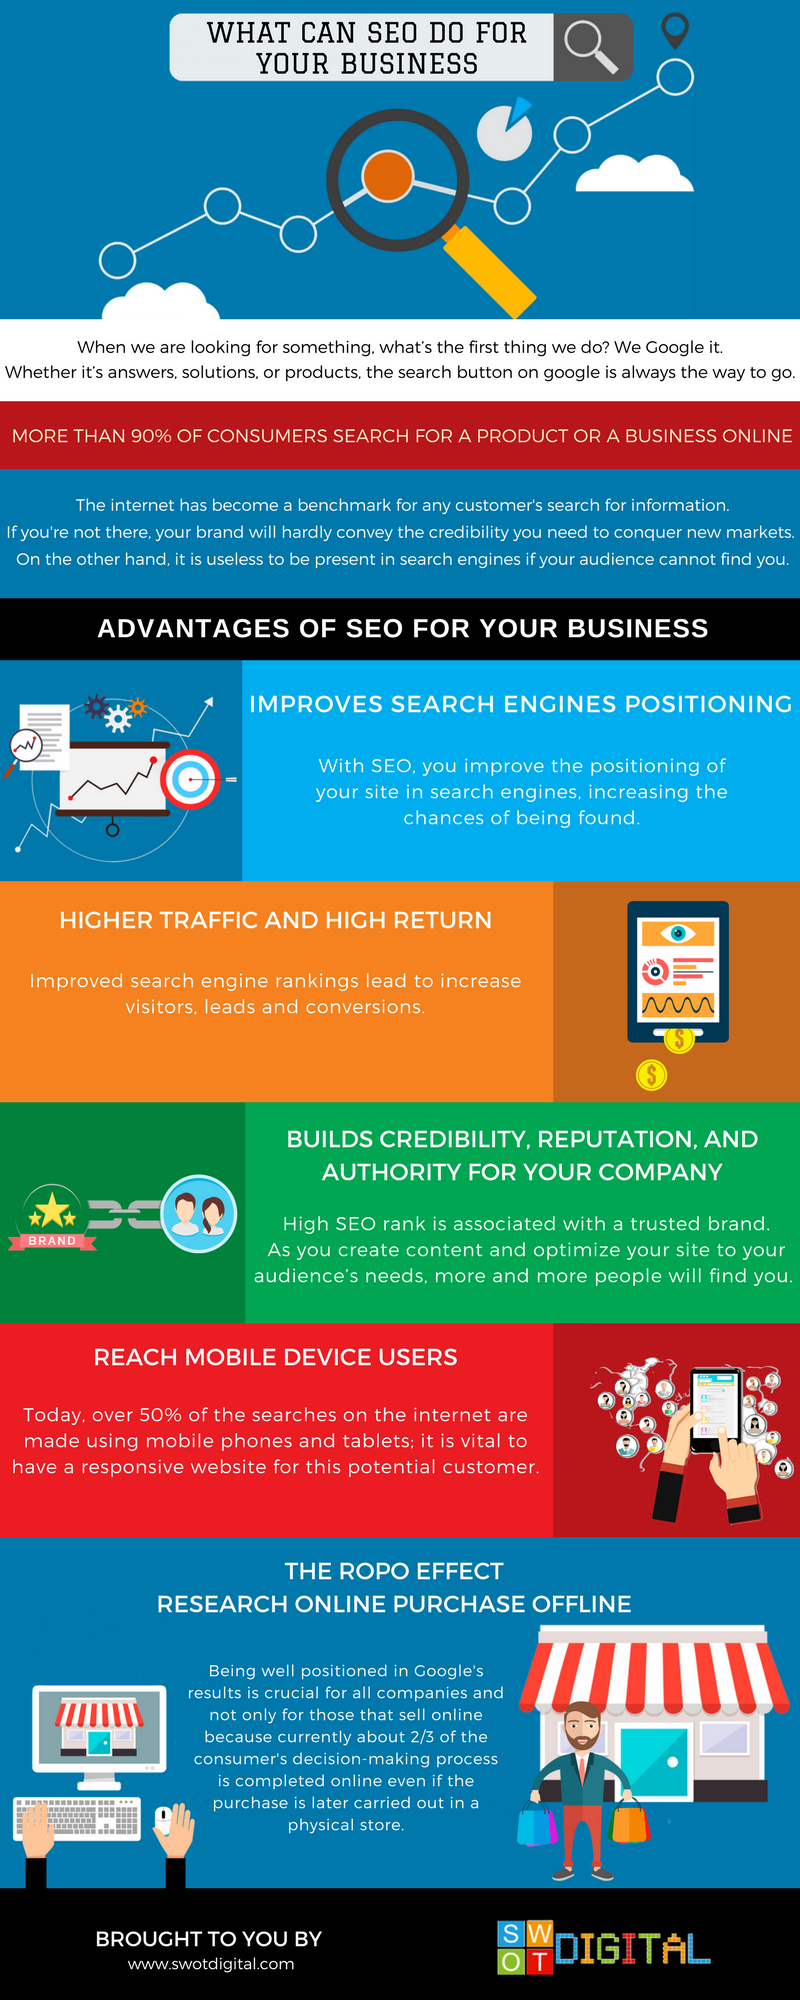 "SEO for Businesses"